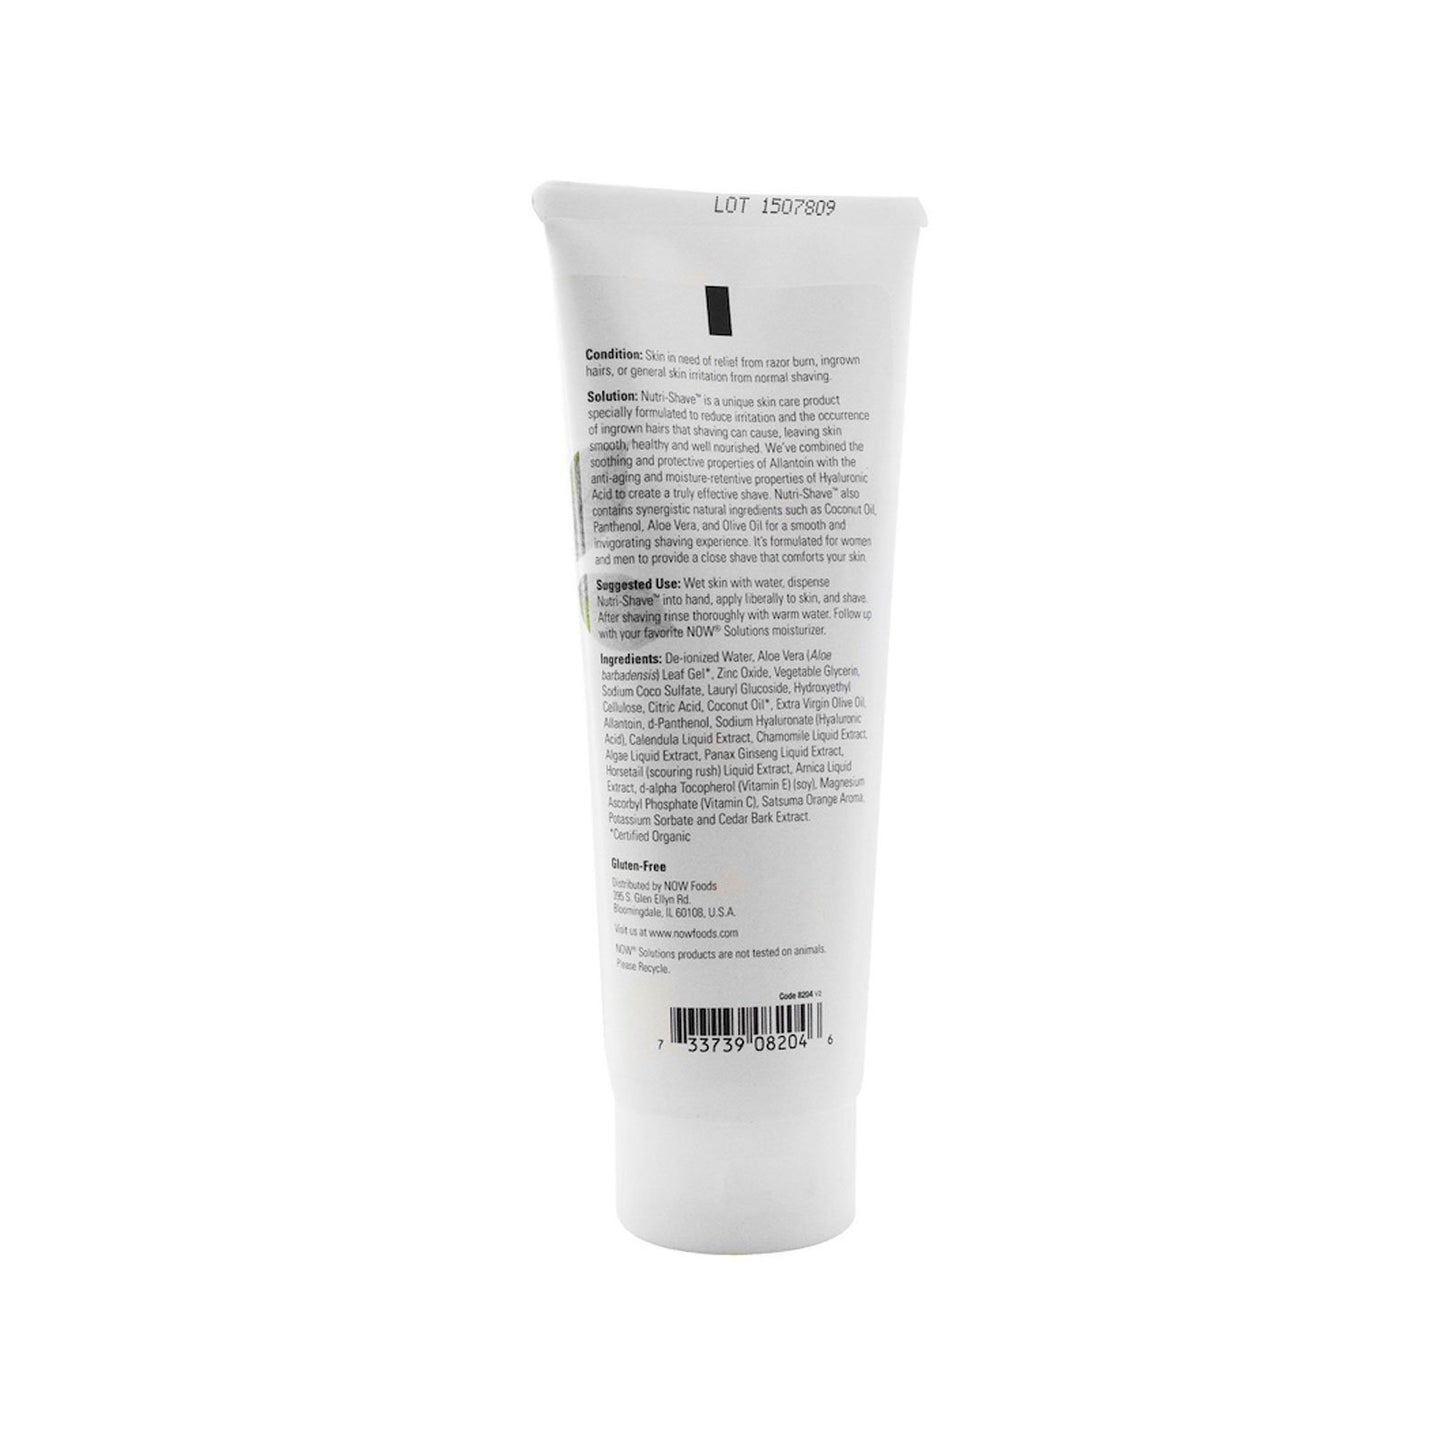 NOW Solutions, Nutri-Shave, Shave Cream, Removes Pore Clogging Residue, Reduces Irritation, 8-Ounce (237 ml) - Bloom Concept